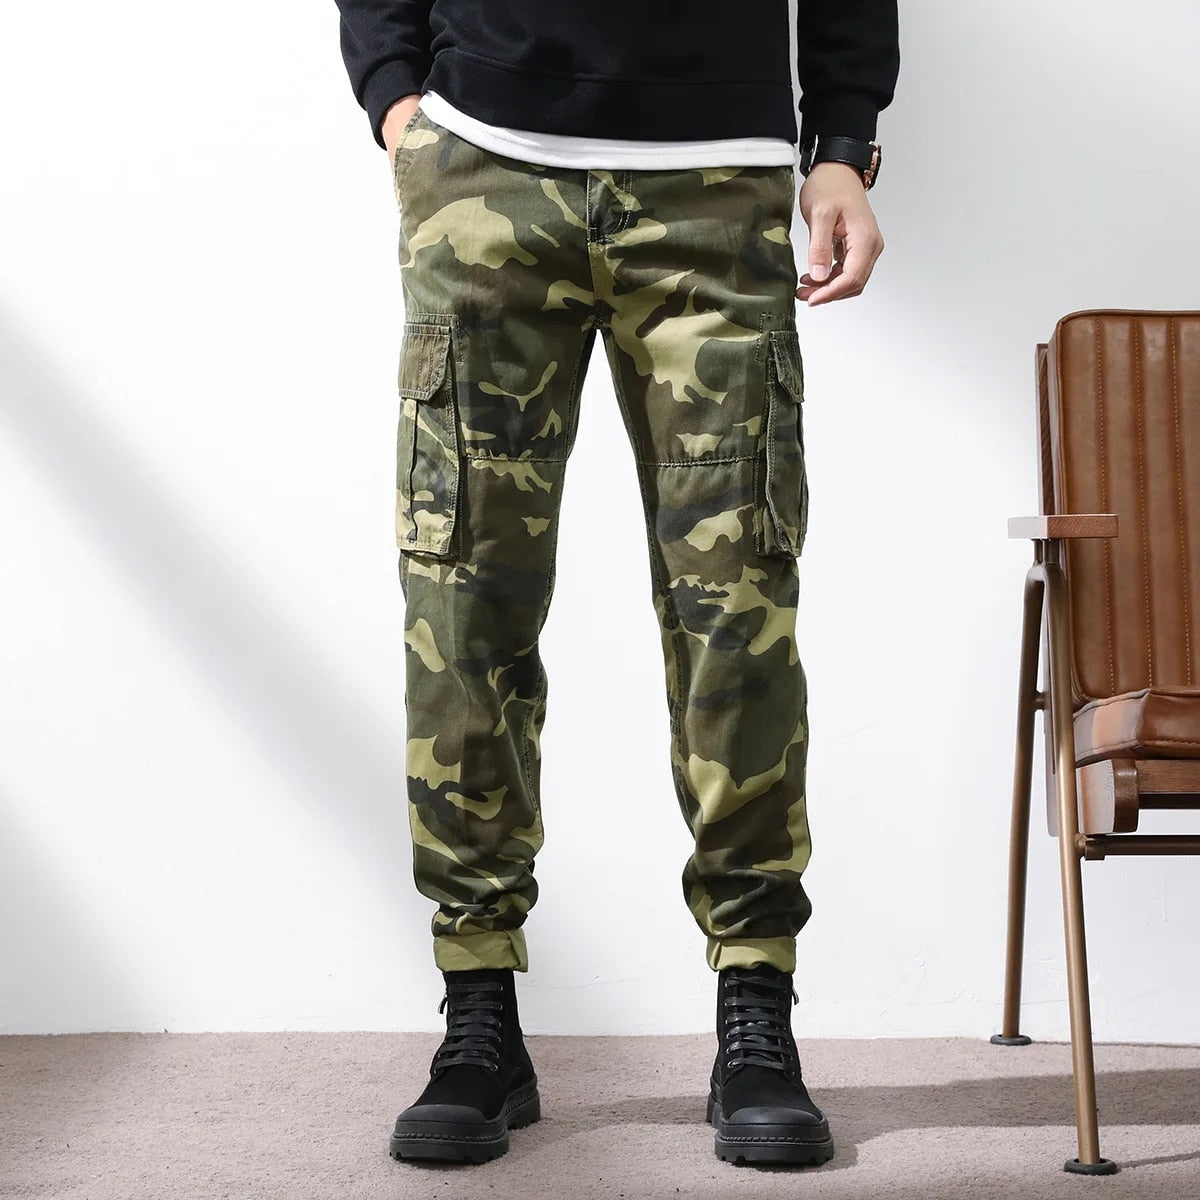 HIP HOP Streetwear Sport Spring Autumn Rock Camouflage Men'S Pocket Military Pants Fashions Casual Trouser 3716 3